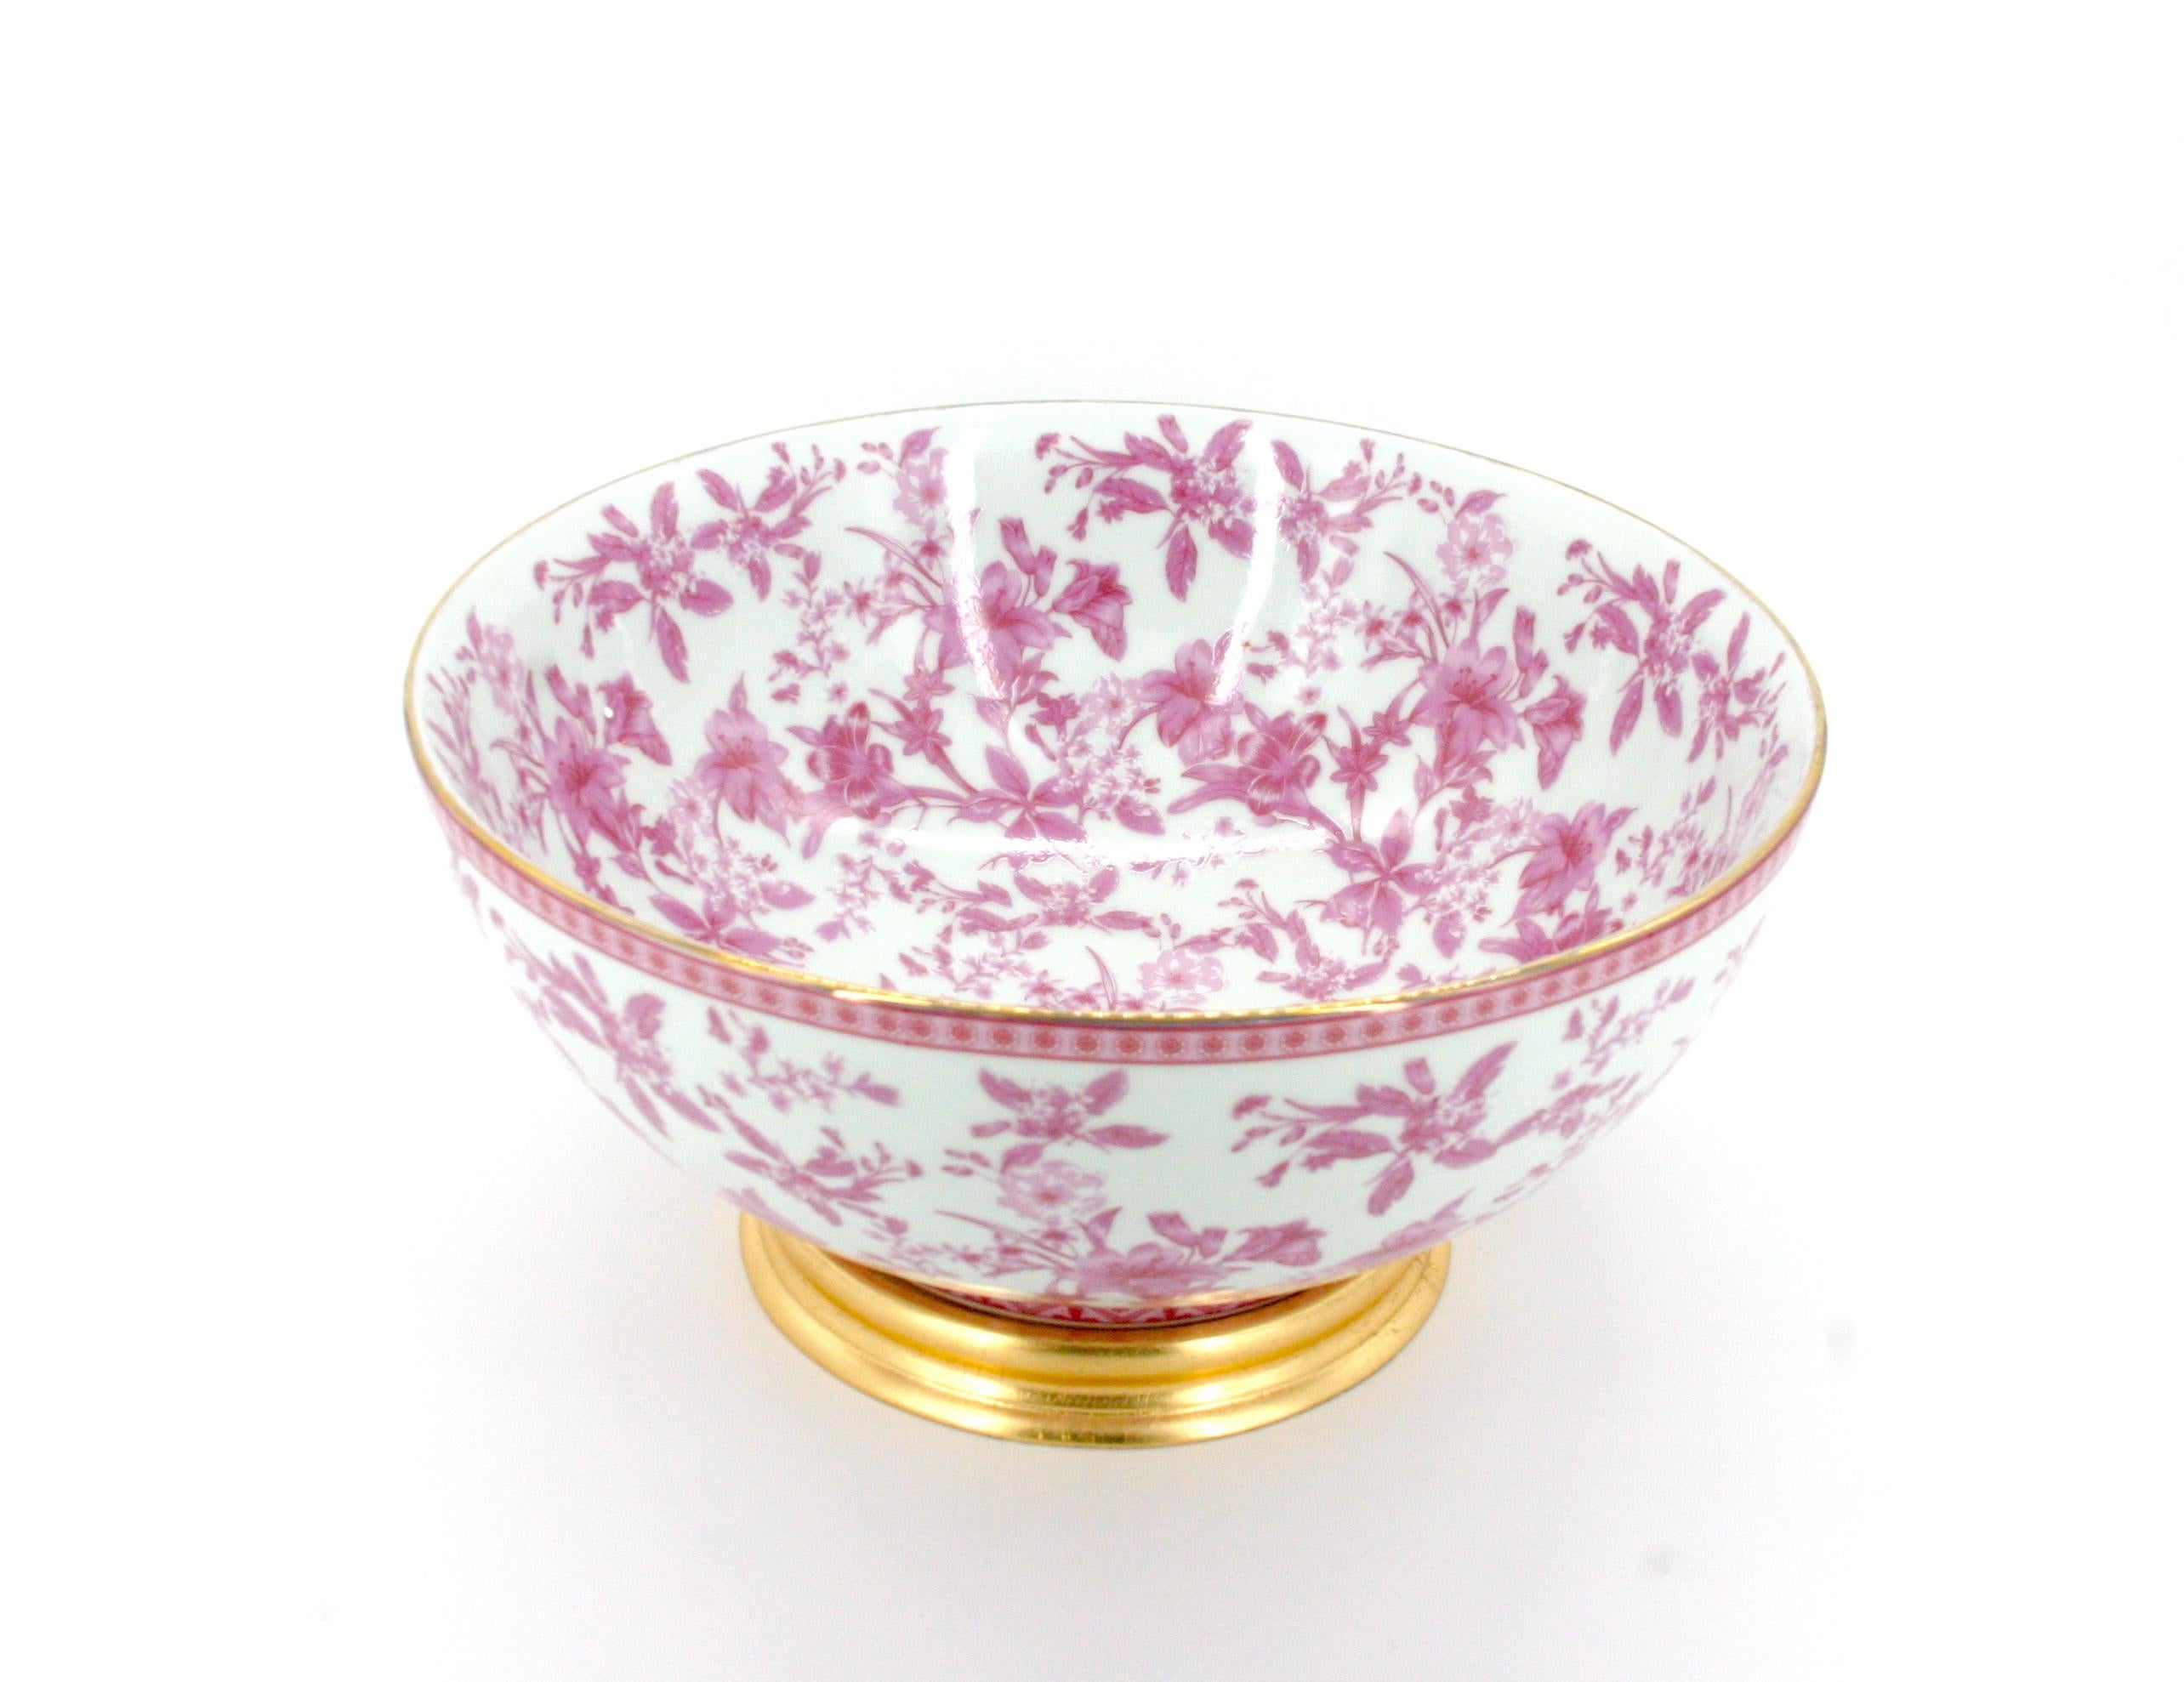 Beautifully hand painted French glazed porcelain decorative bowl / Punch bowl. The bowl features interior and exterior floral details with gold trim top and a detachable gilt wooden base. The bowl is in excellent condition. Minor wear. It measures